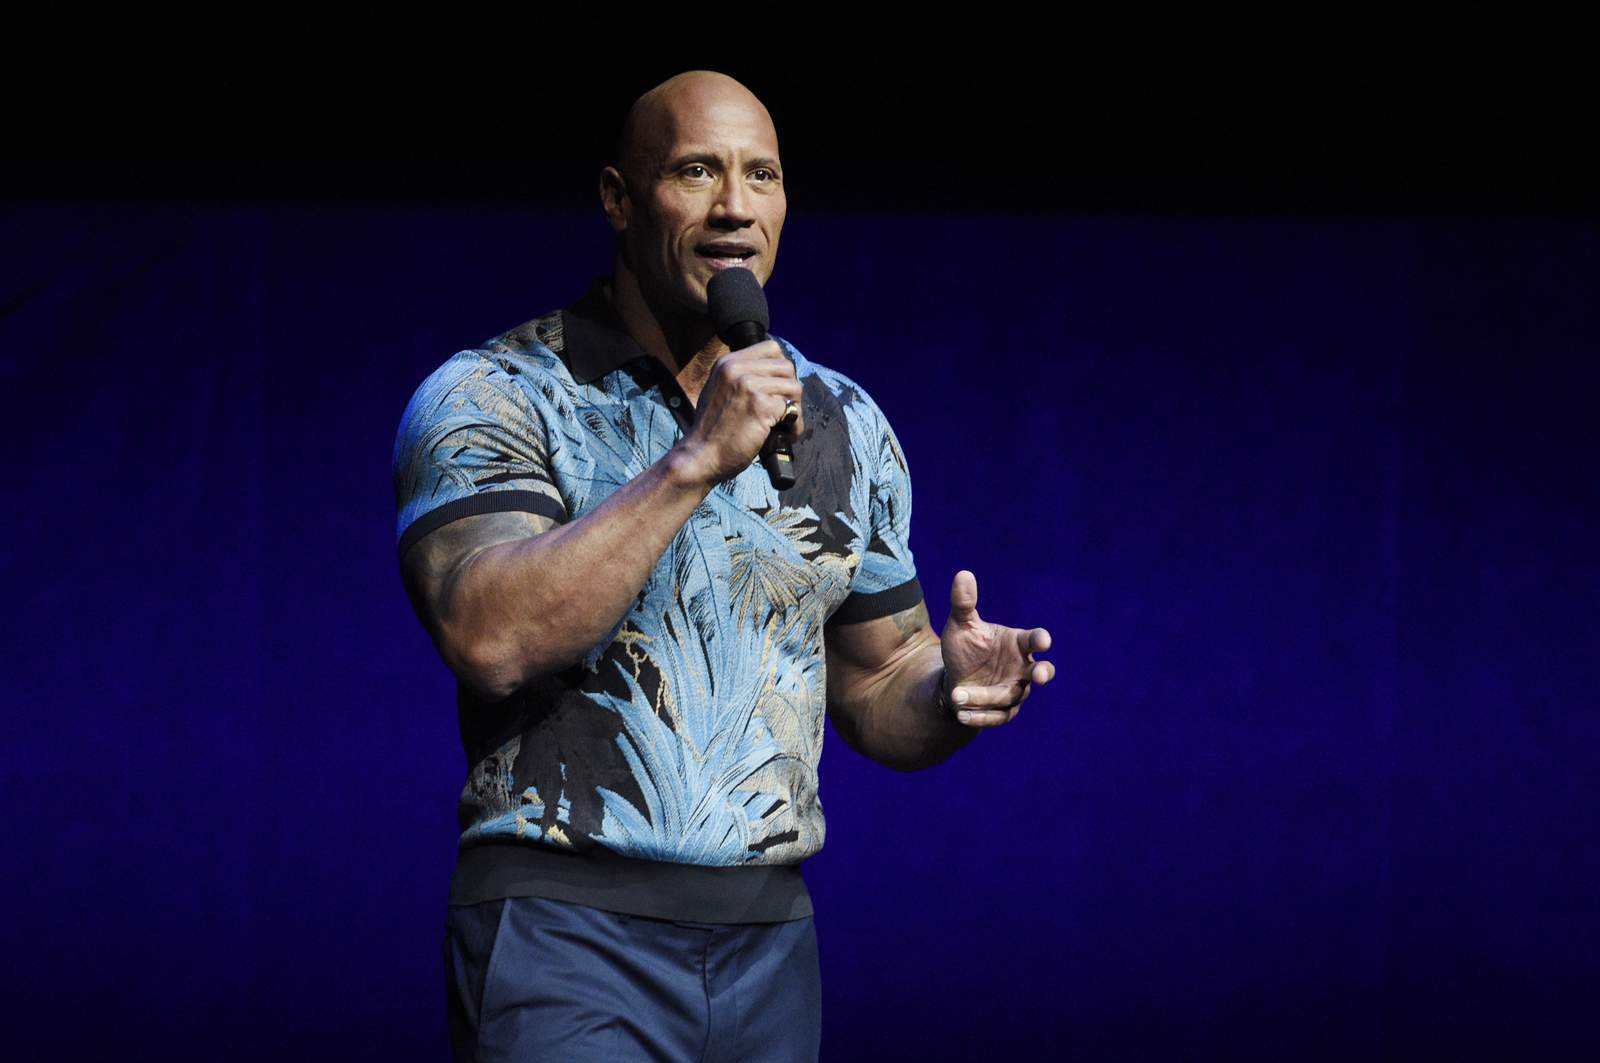 The Rock, his family tested positive for the coronavirus